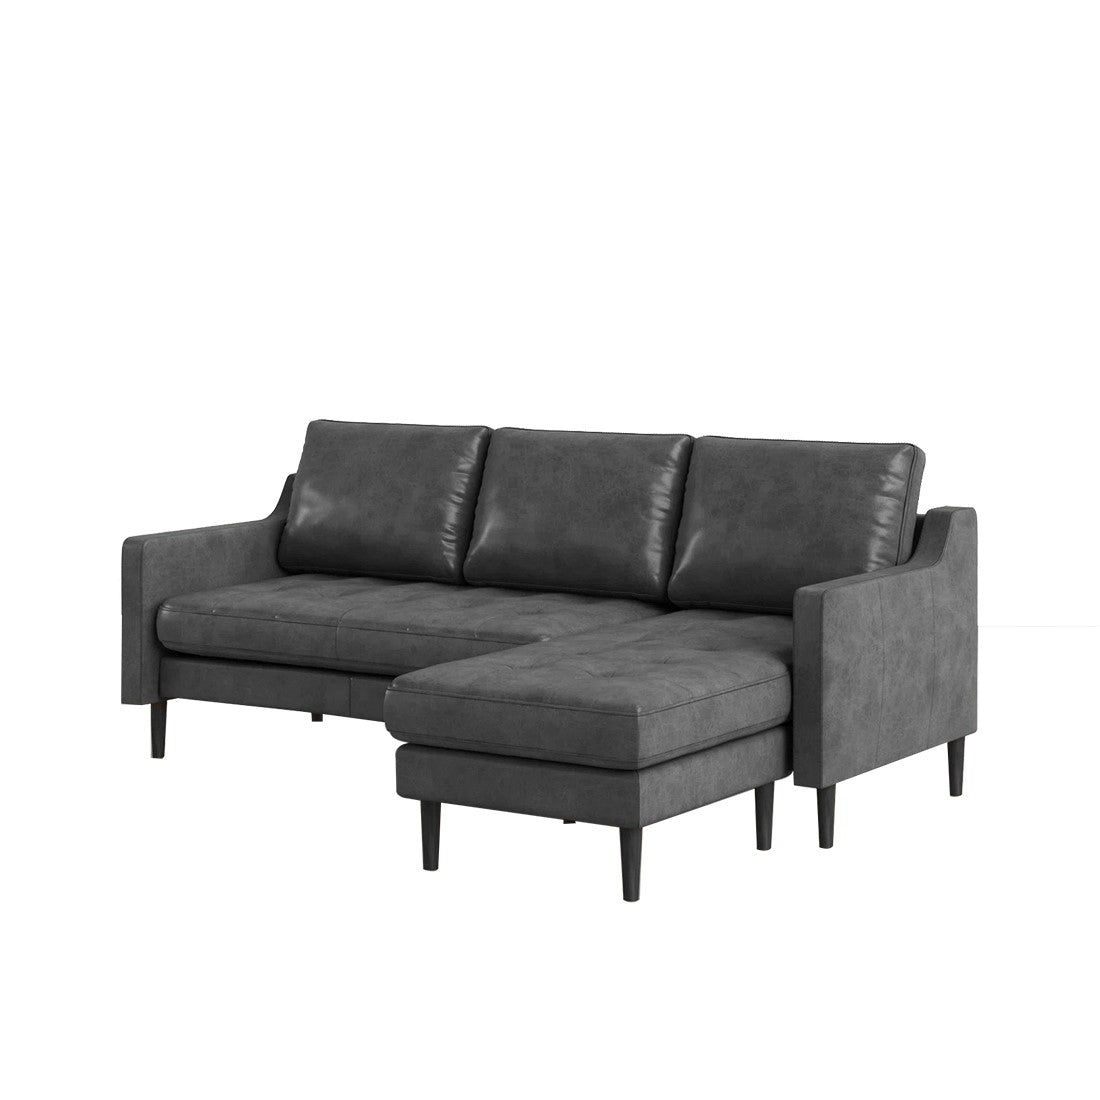 Torque - Pacific 4 Seater Leather L Shape Sofa for Living Room - Torque India